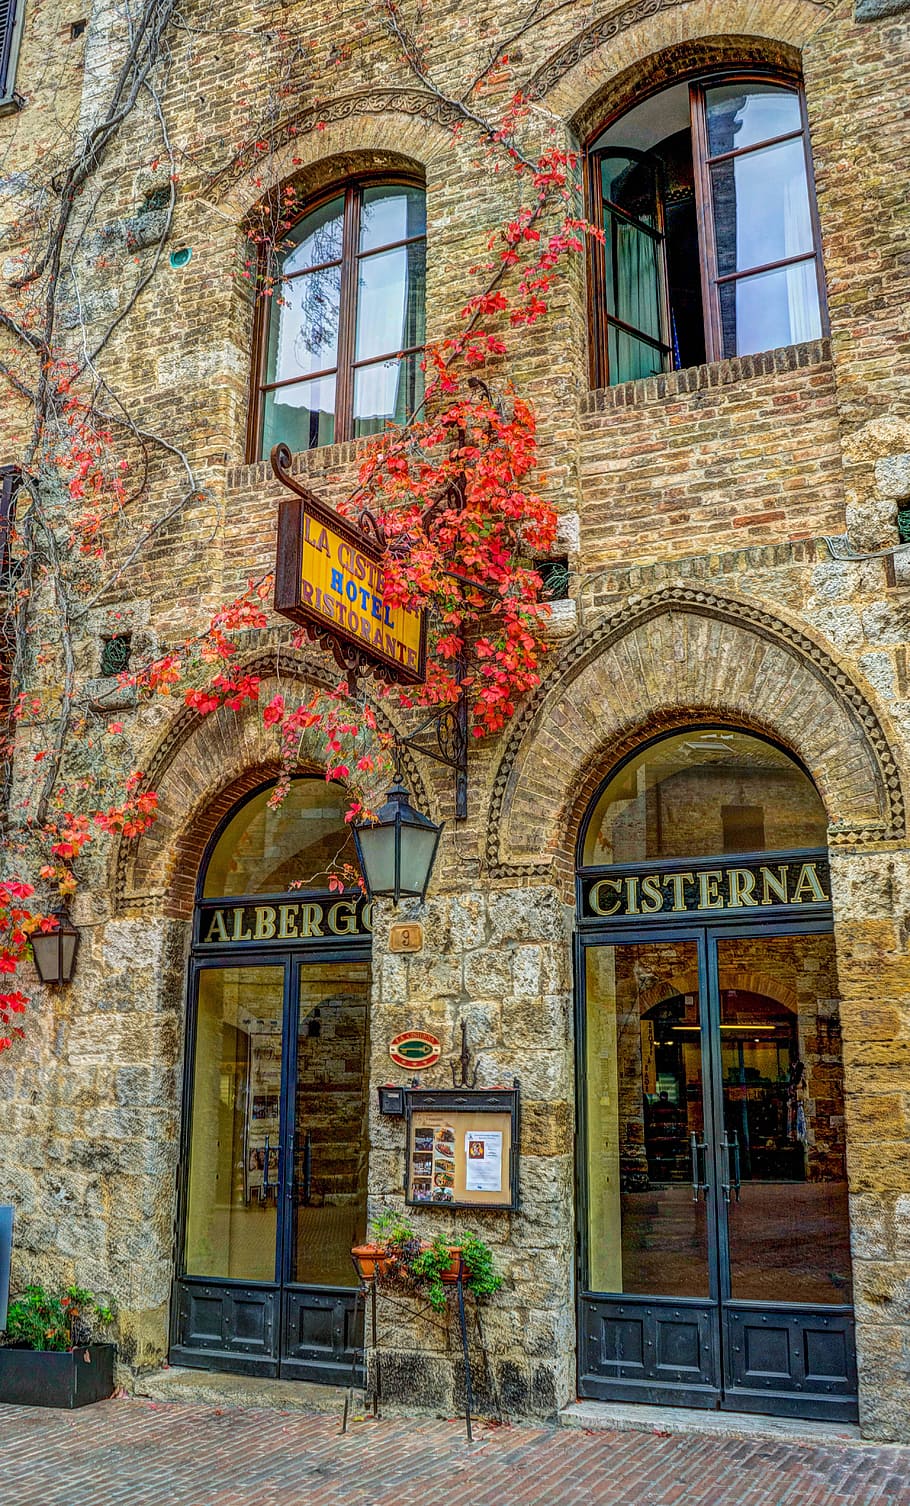 san gimignano, italy, tuscany, architecture, ancient, historic, medieval, tourism, historical, outdoor